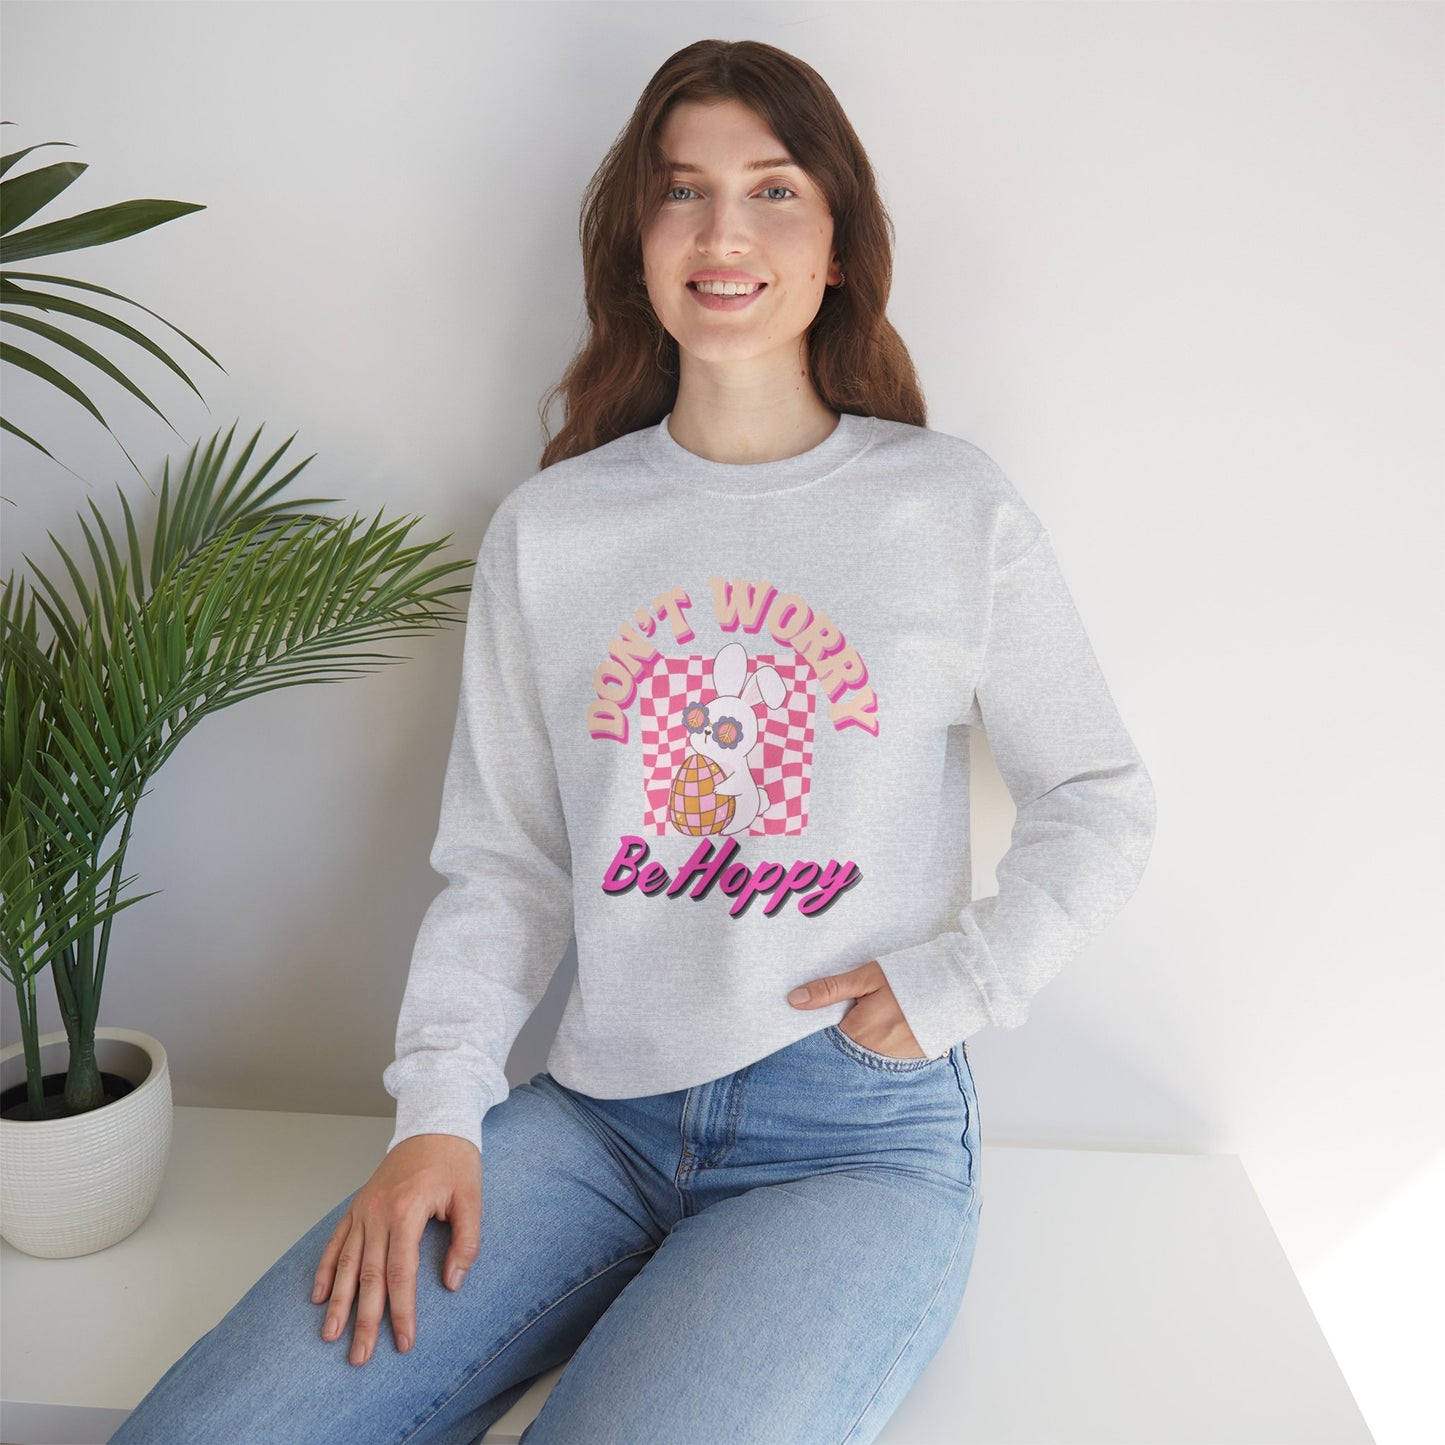 BE HOPPY round-neck sweatshirt for Easter - adult